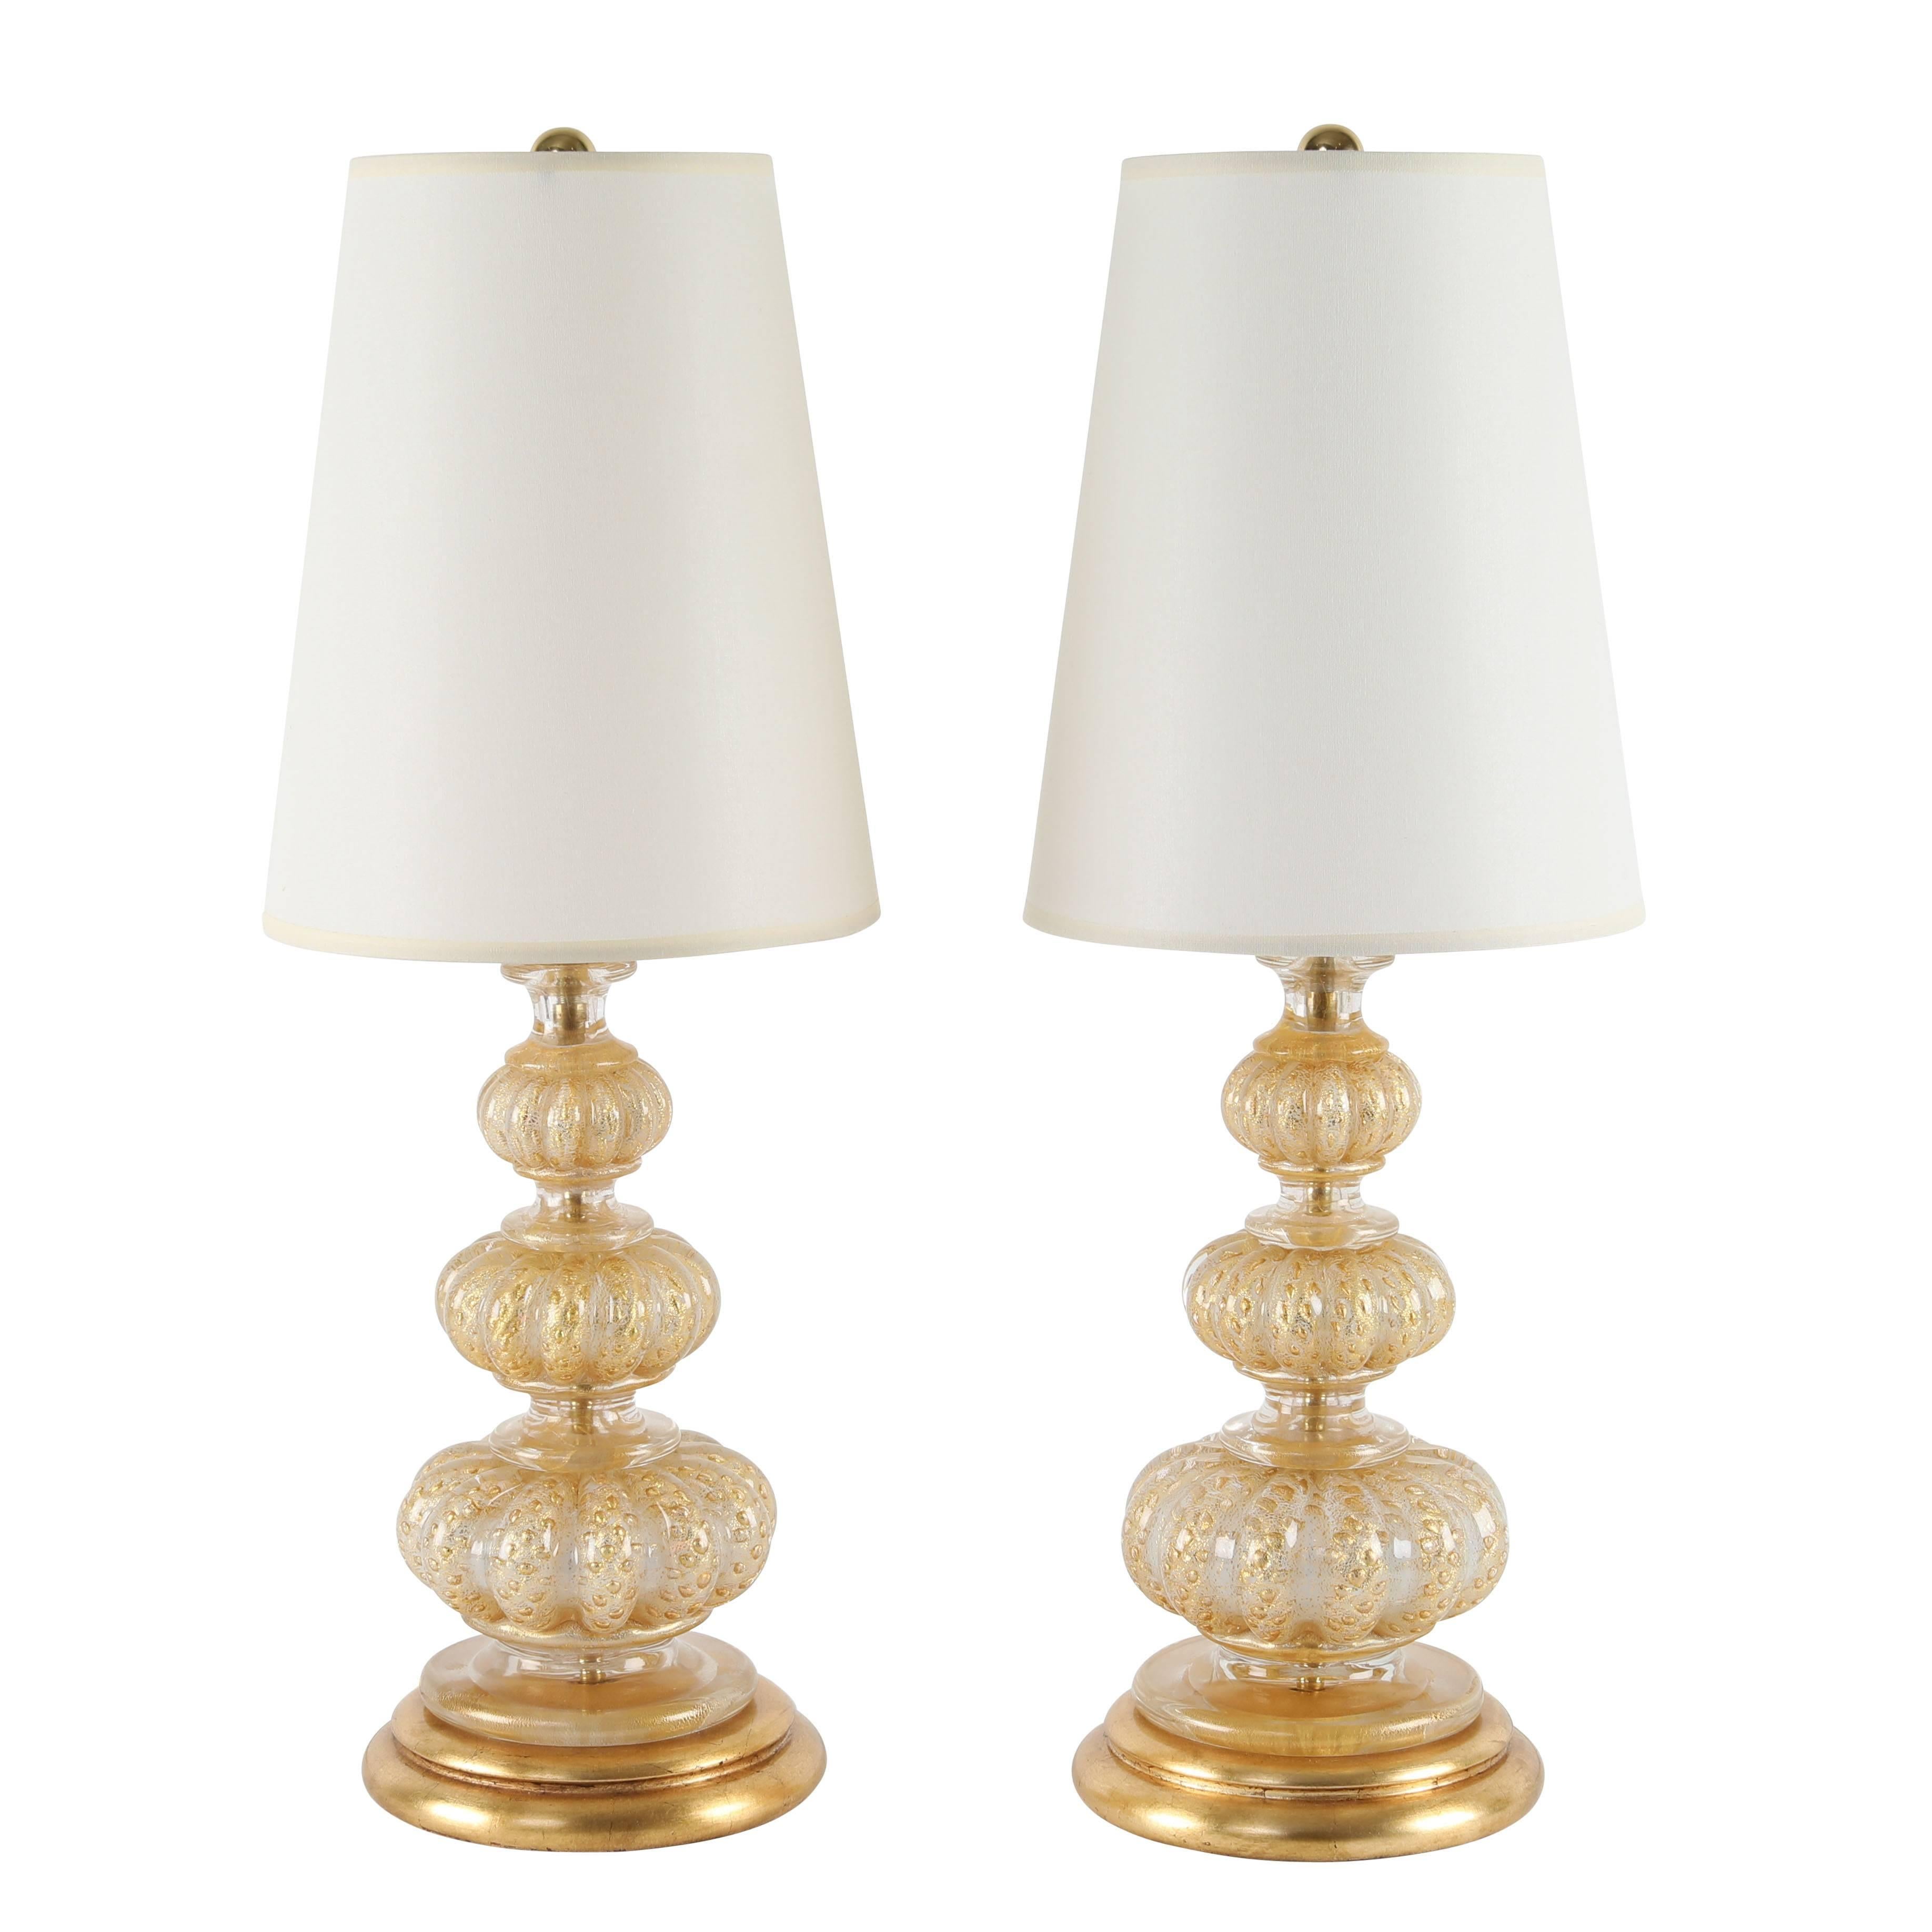 Pair of 1940s Bubble and Gold Leaf "Cordonato d'Oro" Lamps by Ercole Barovier For Sale